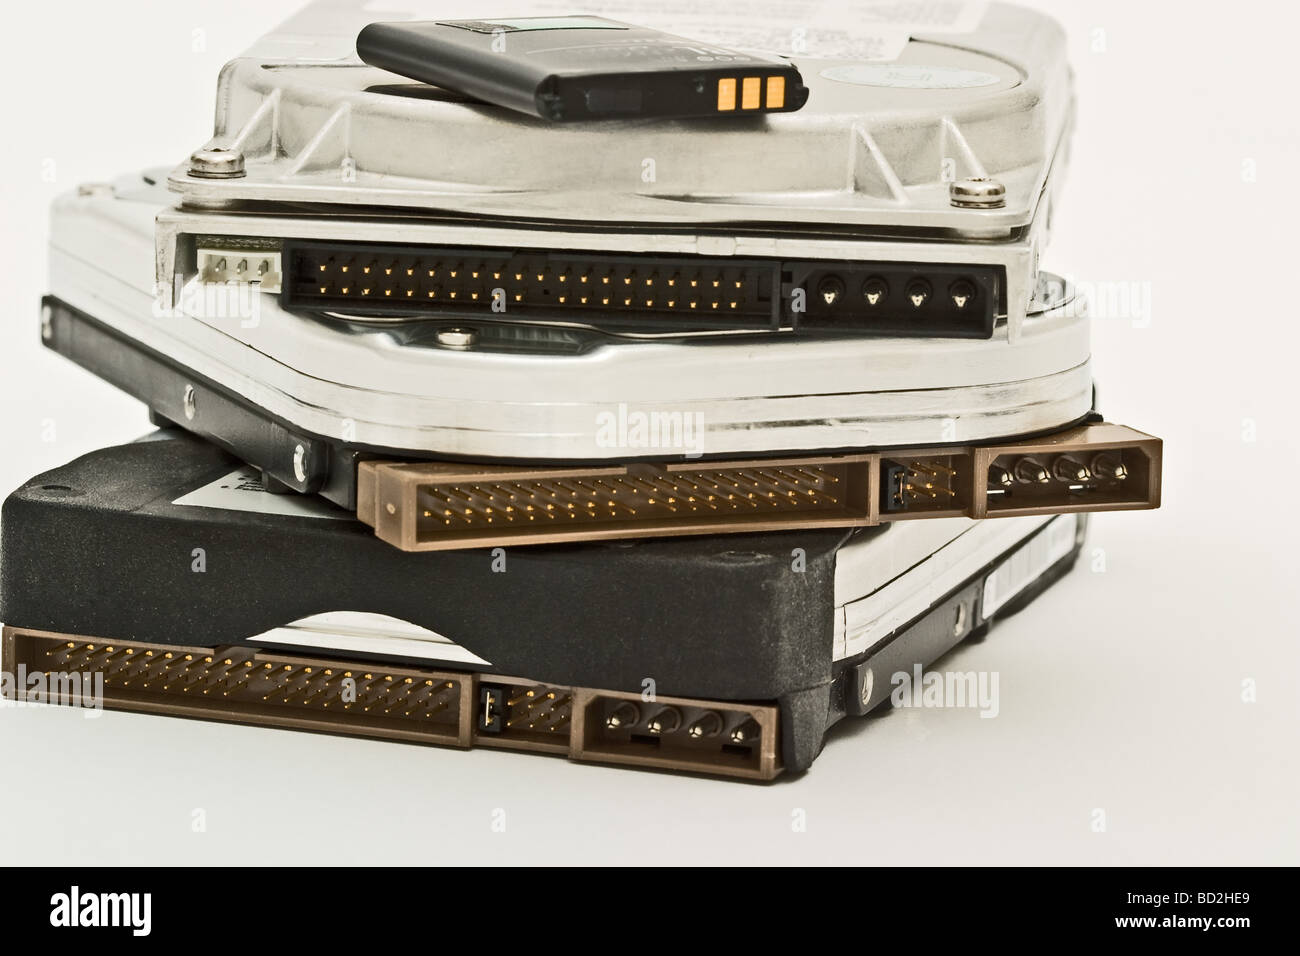 Pile of computer hard drives with a small battery on the top Stock Photo